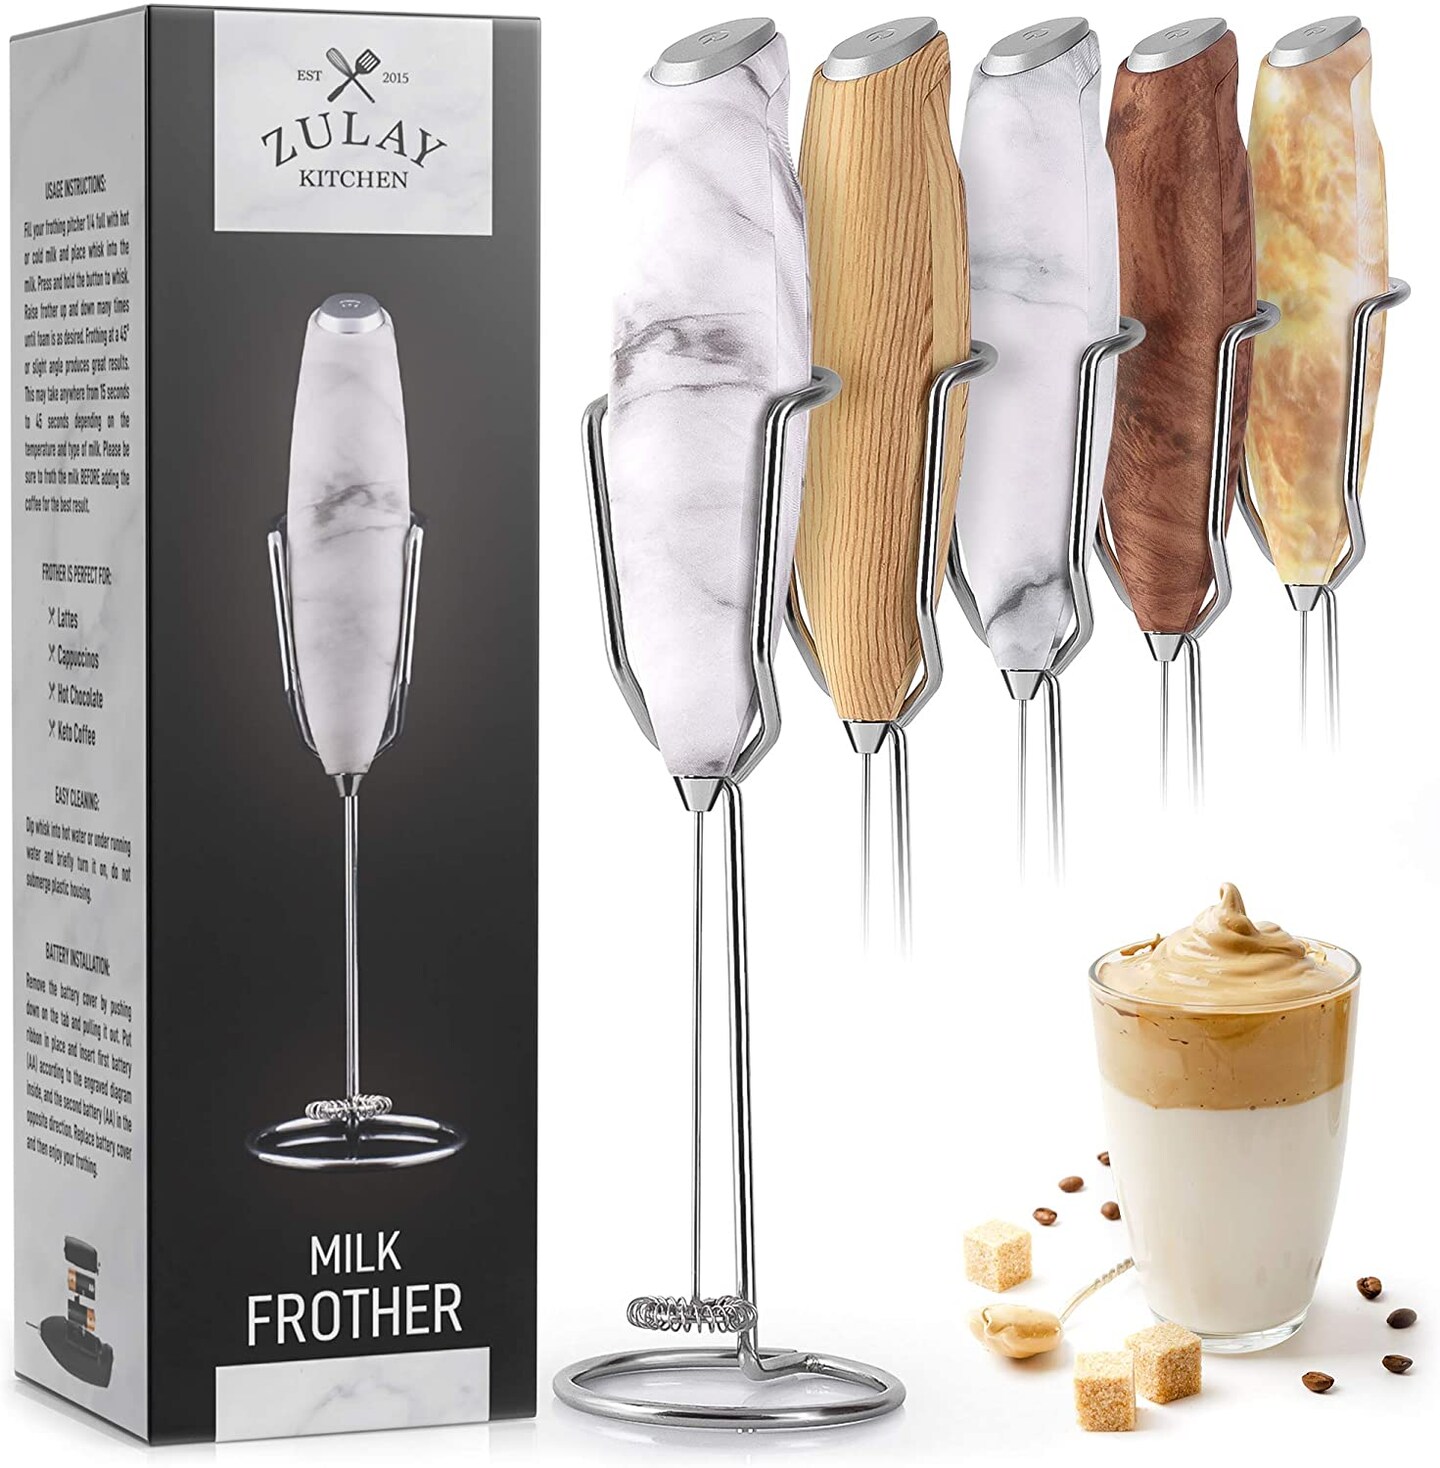  Zulay Kitchen Original Frother Stand for Milk Frothers